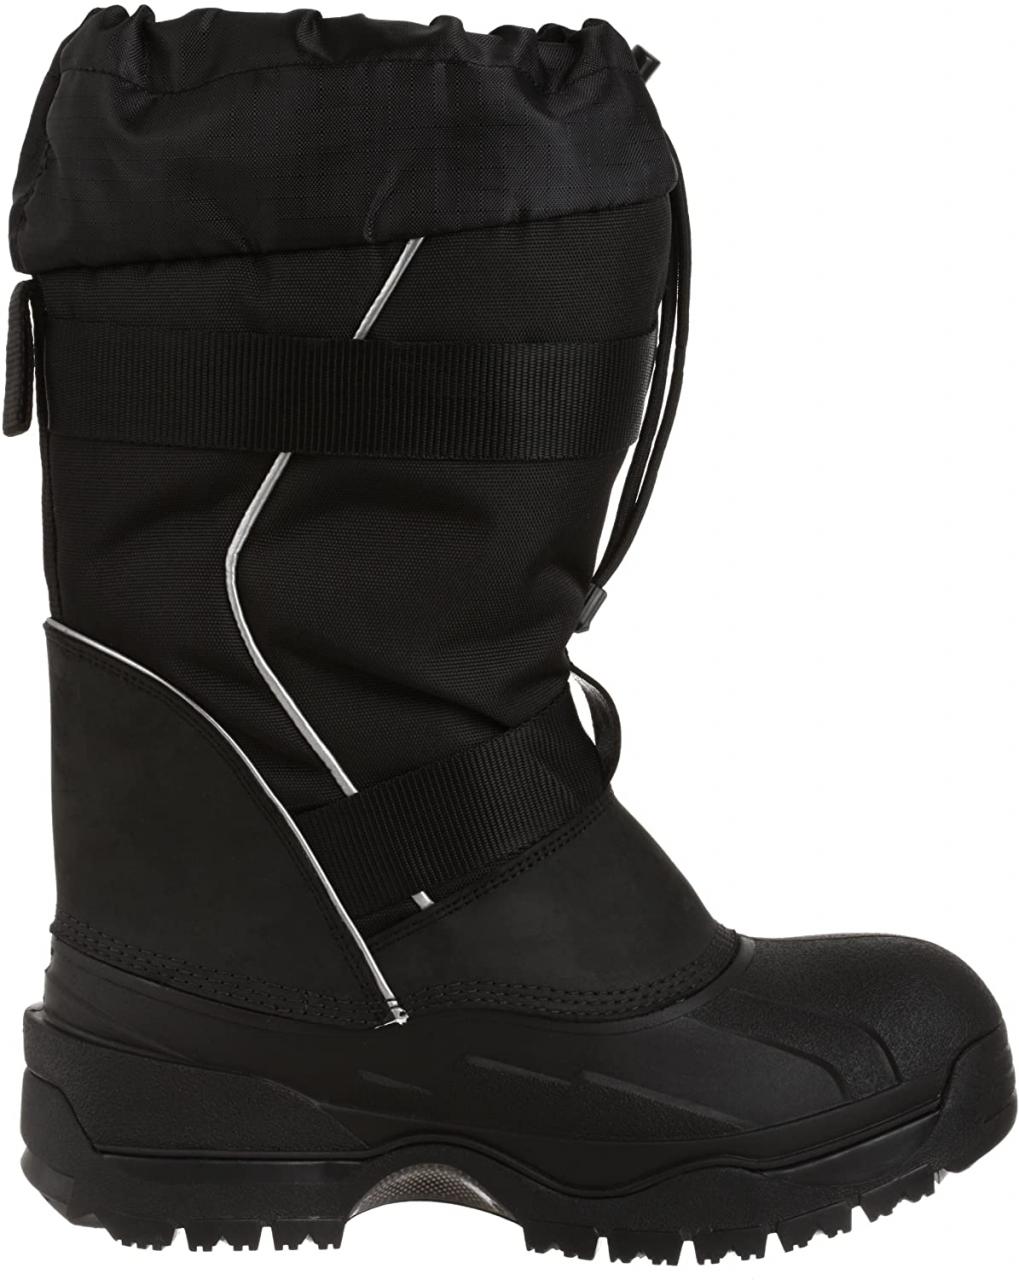 baffin men's impact insulated boot Promotions